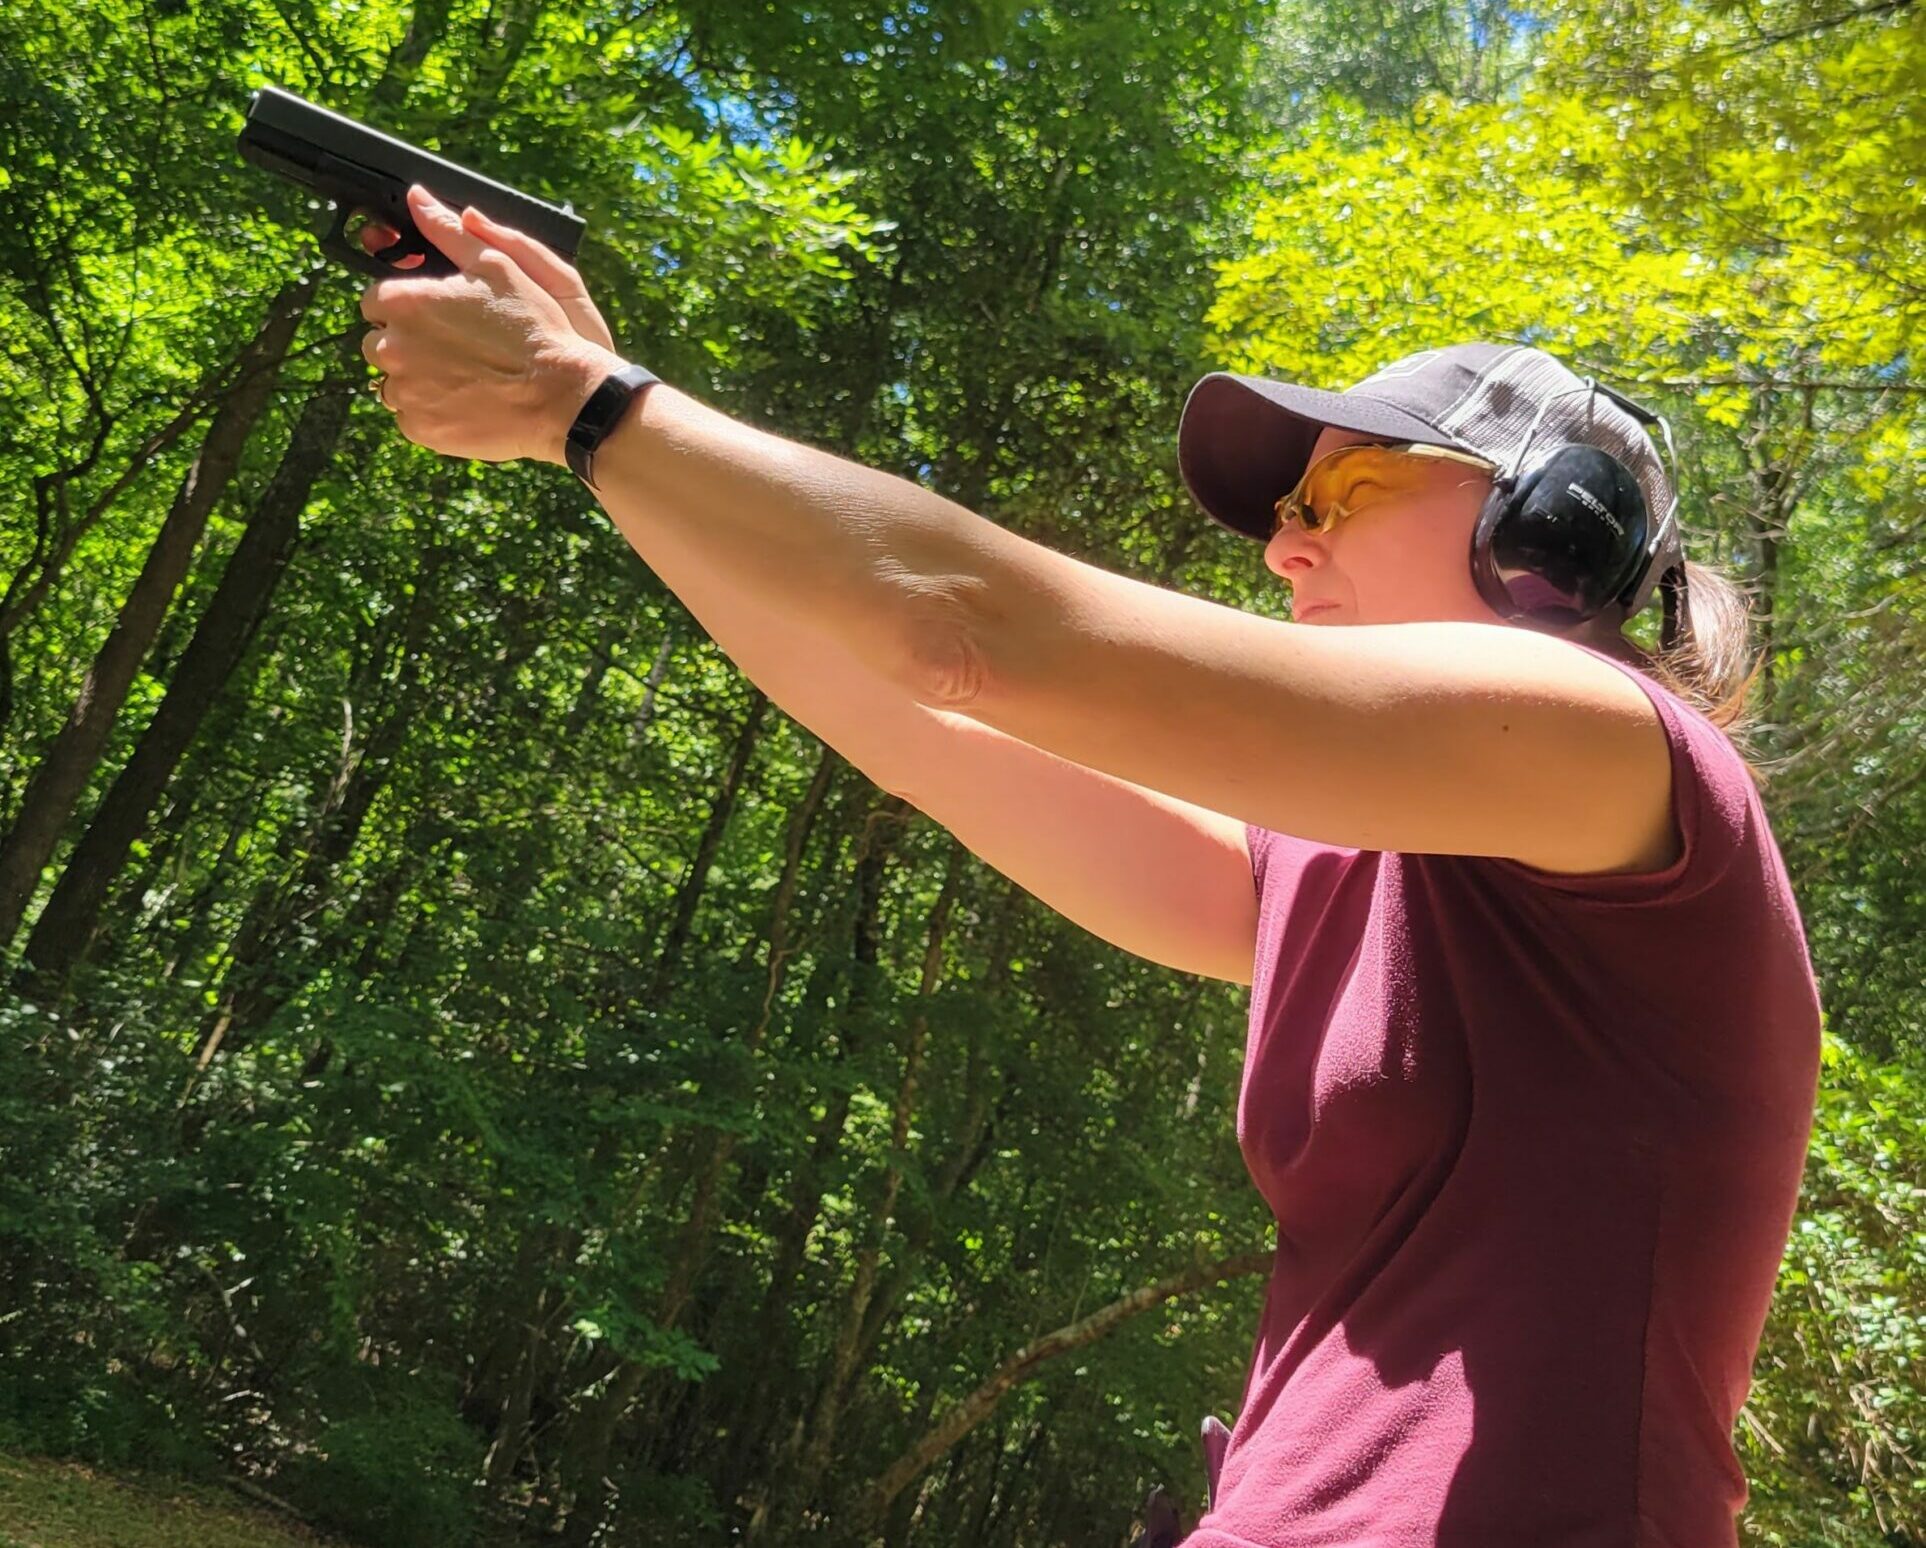 The author firing Federal Syntech at the range